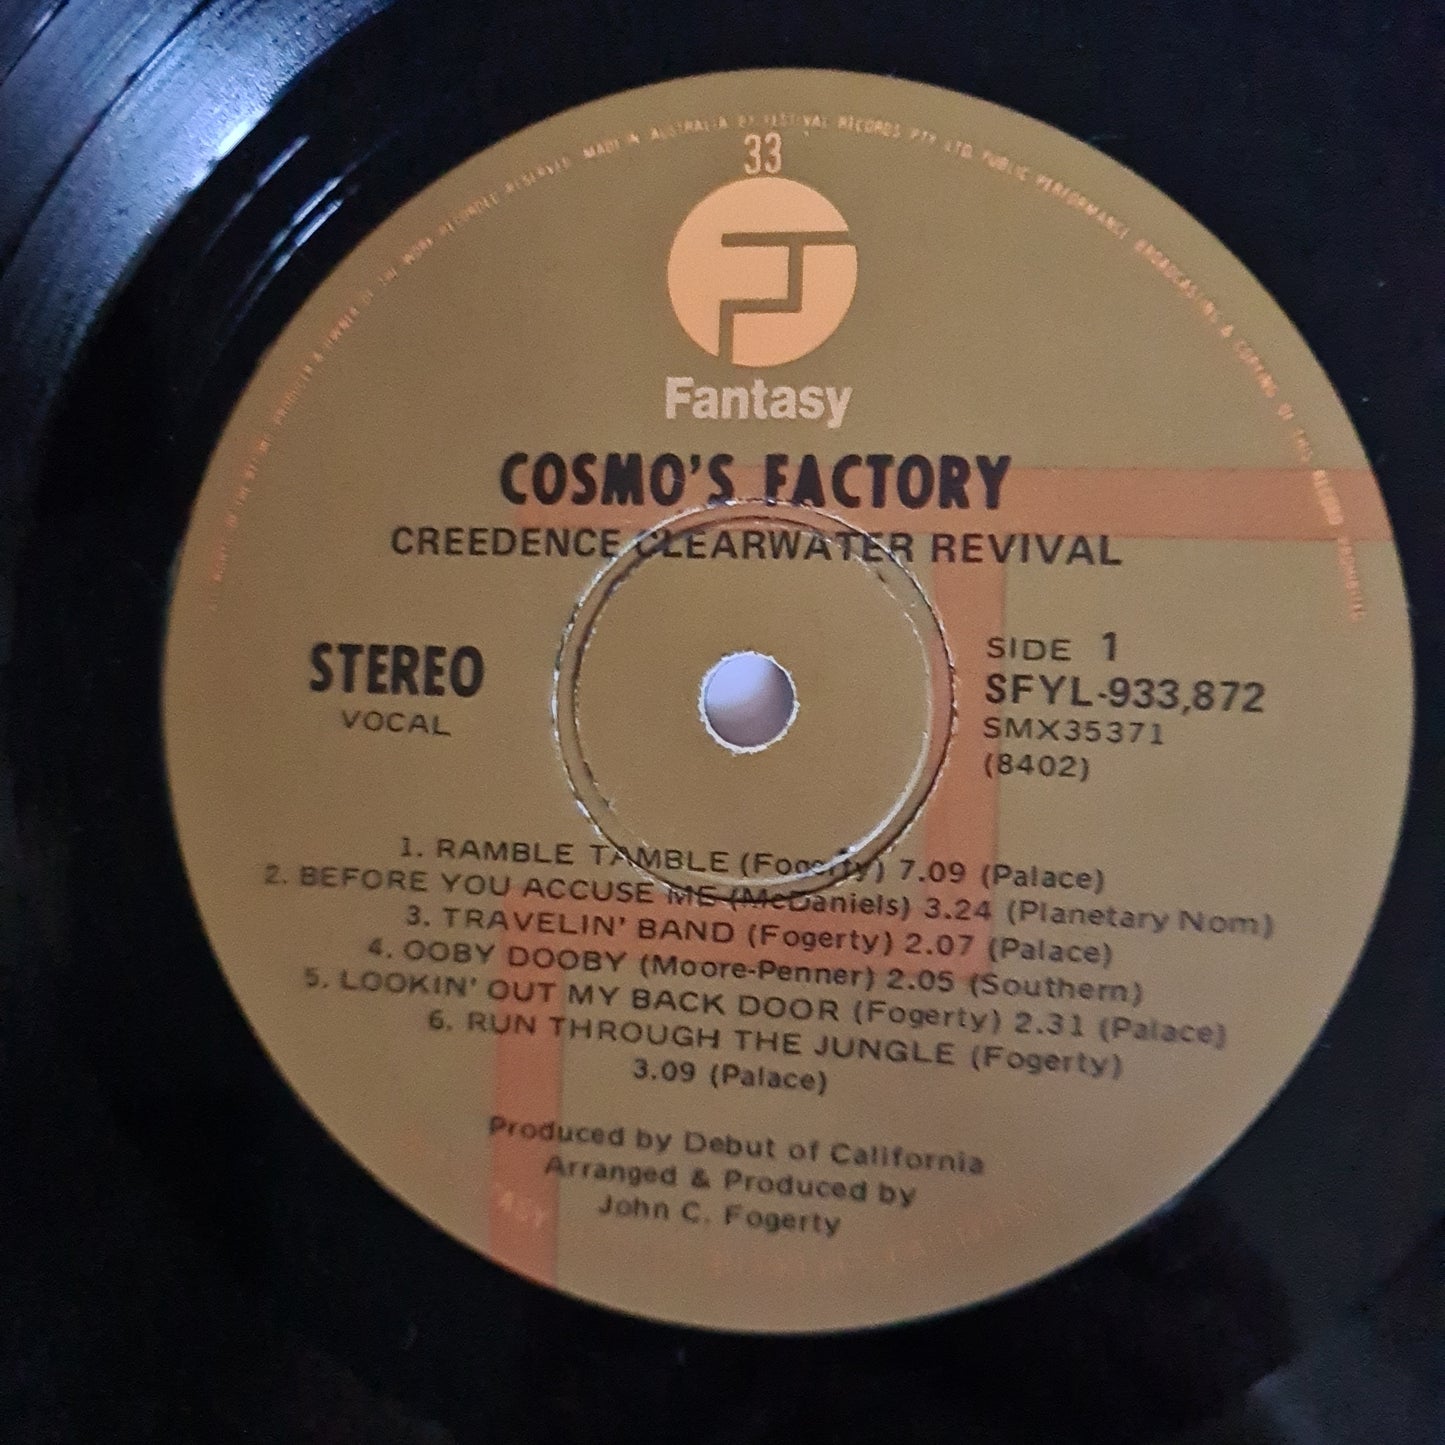 Creedence Clearwater Revival – Cosmo's Factory - 1970 - Vinyl Record